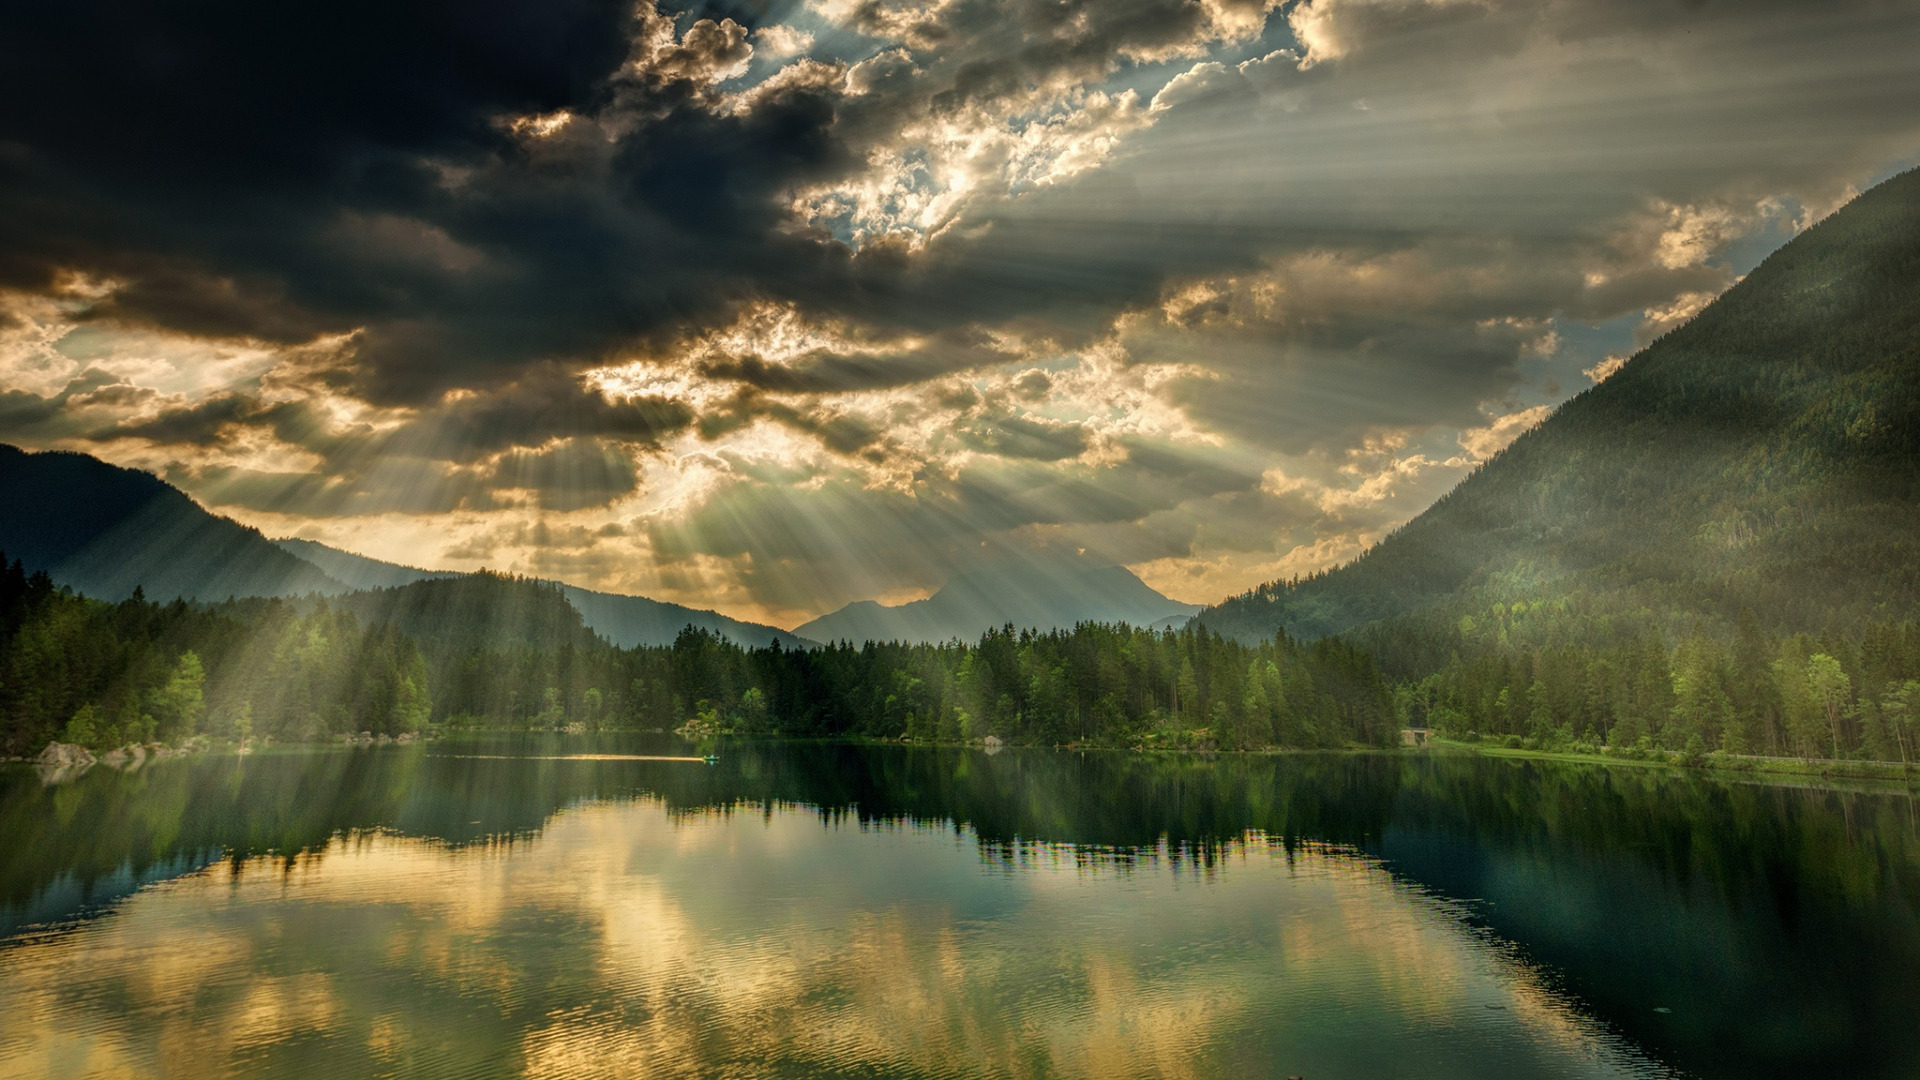 General 1920x1080 nature landscape trees forest HDR sun rays lake hills water clouds reflection